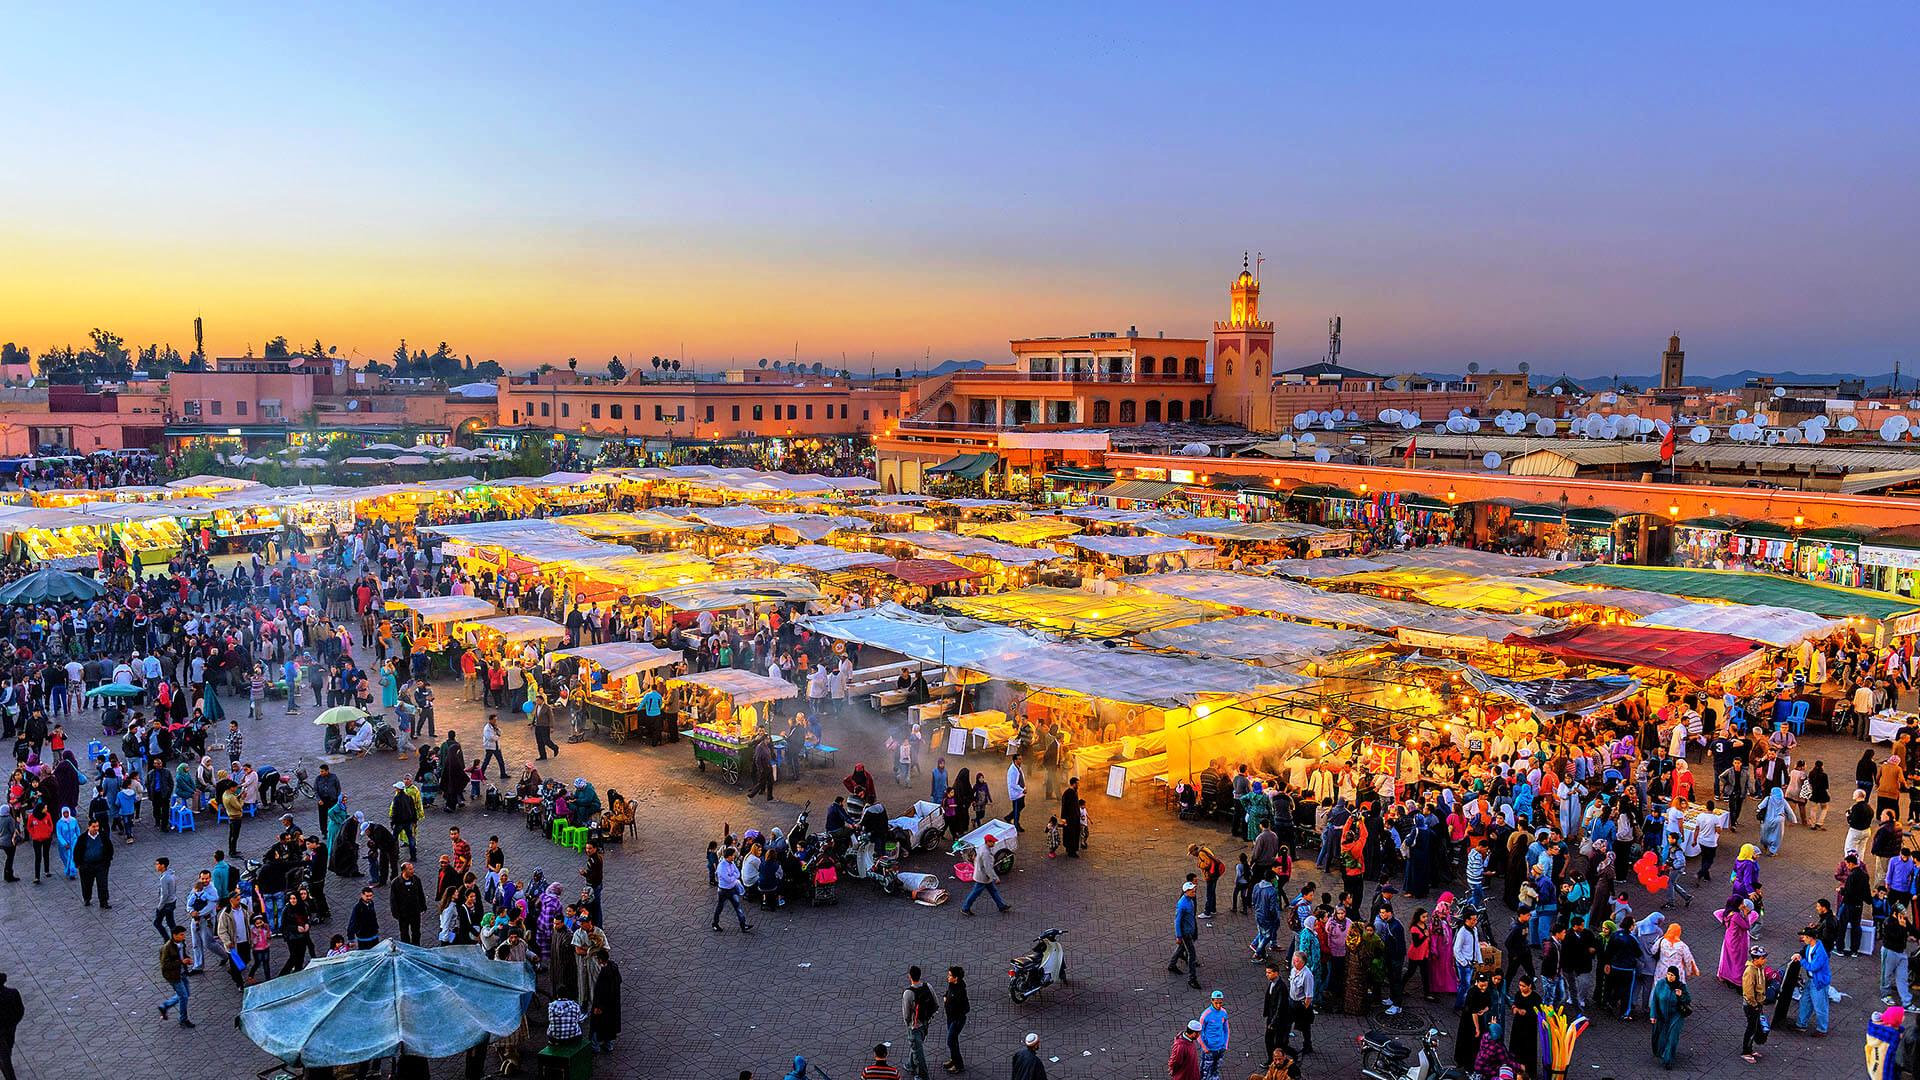 12 days Morocco discovery tour from Fez to discover Imperial cities and Desert of Morocco